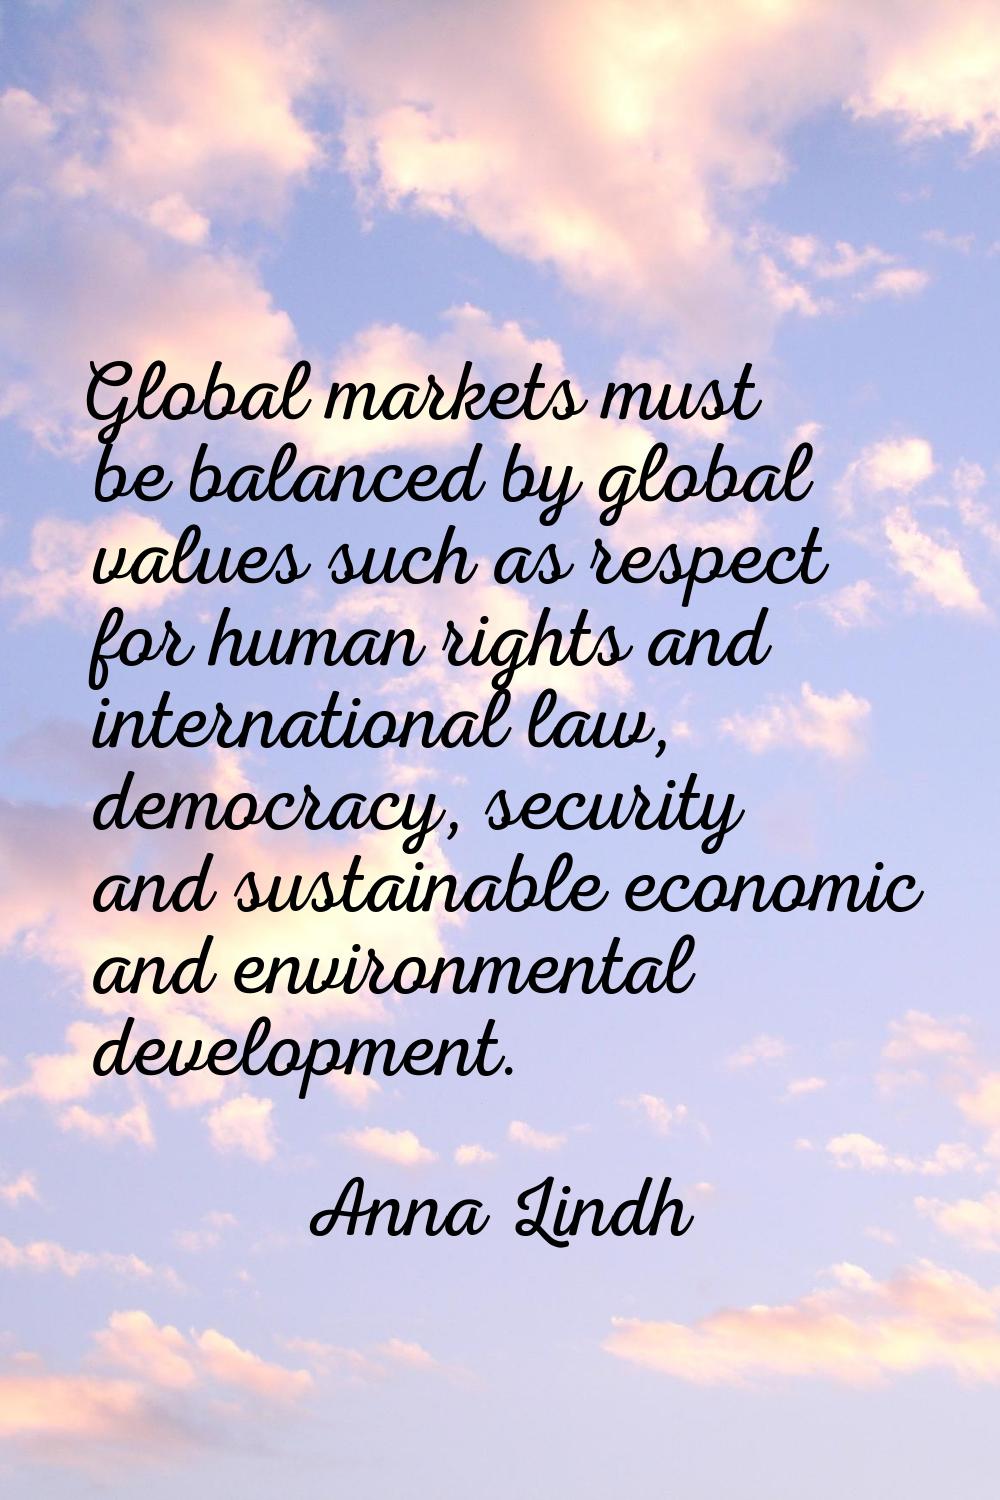 Global markets must be balanced by global values such as respect for human rights and international